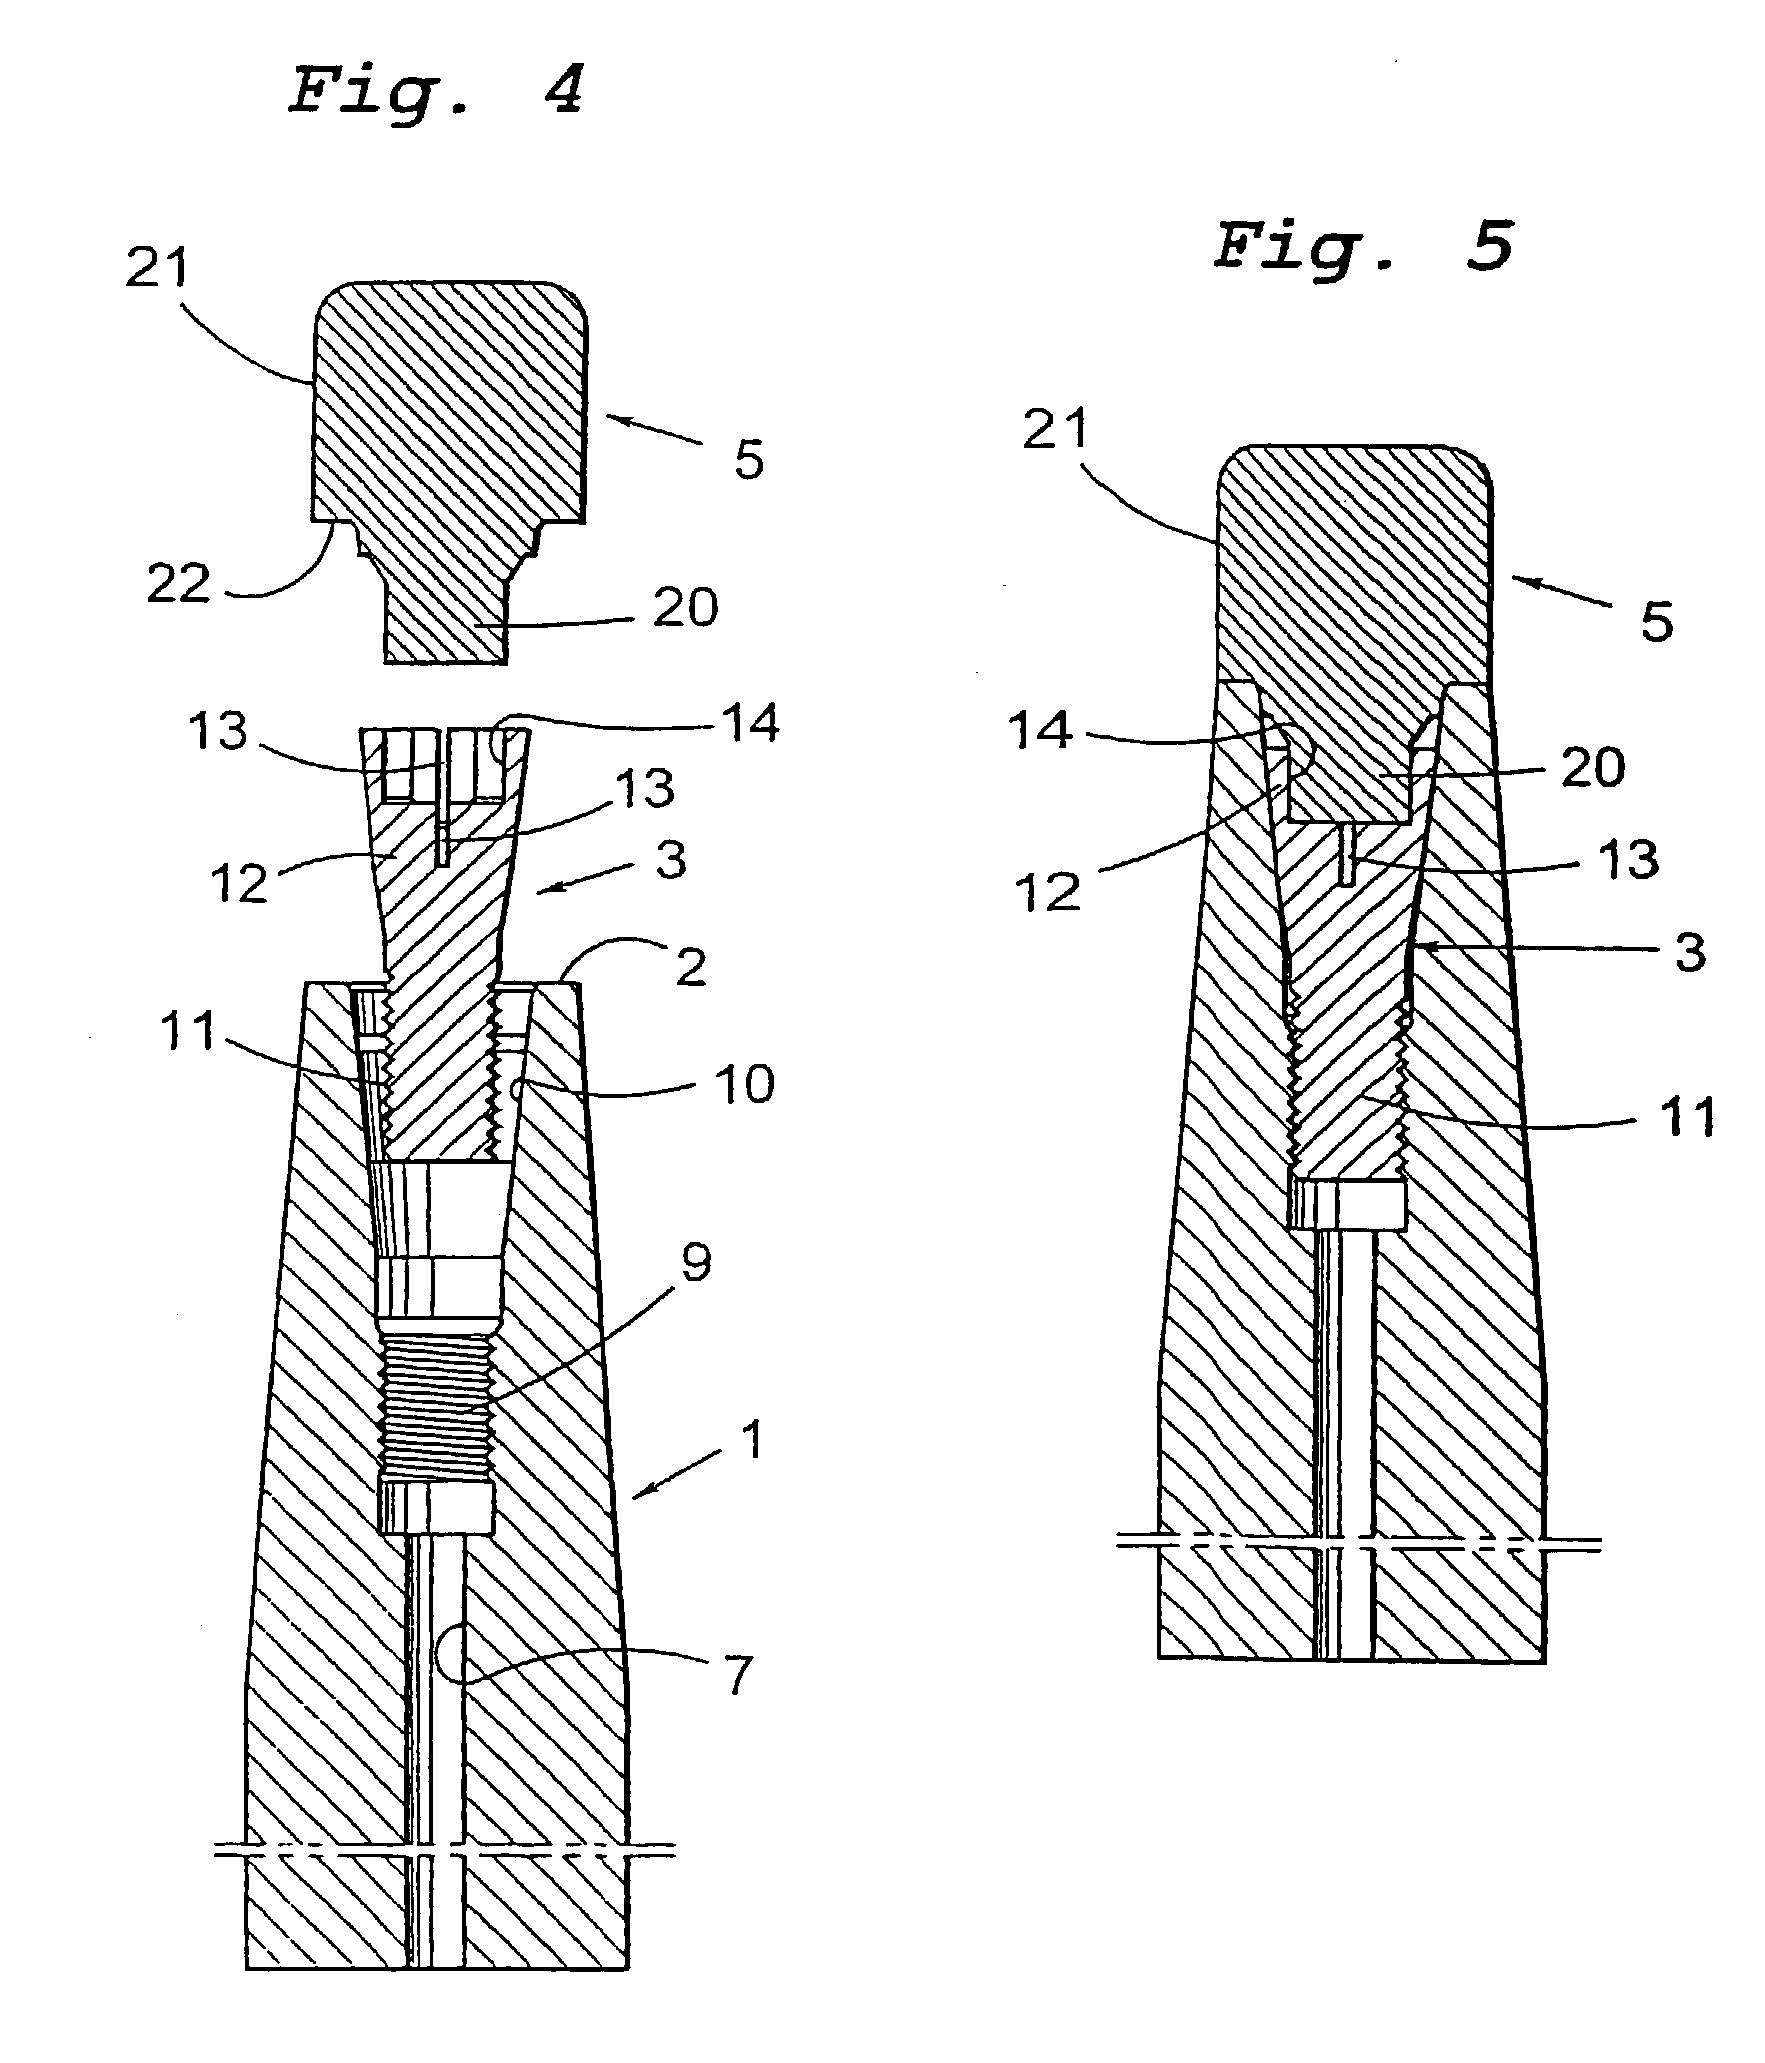 Rotary tool and cutting part comprised in the tool